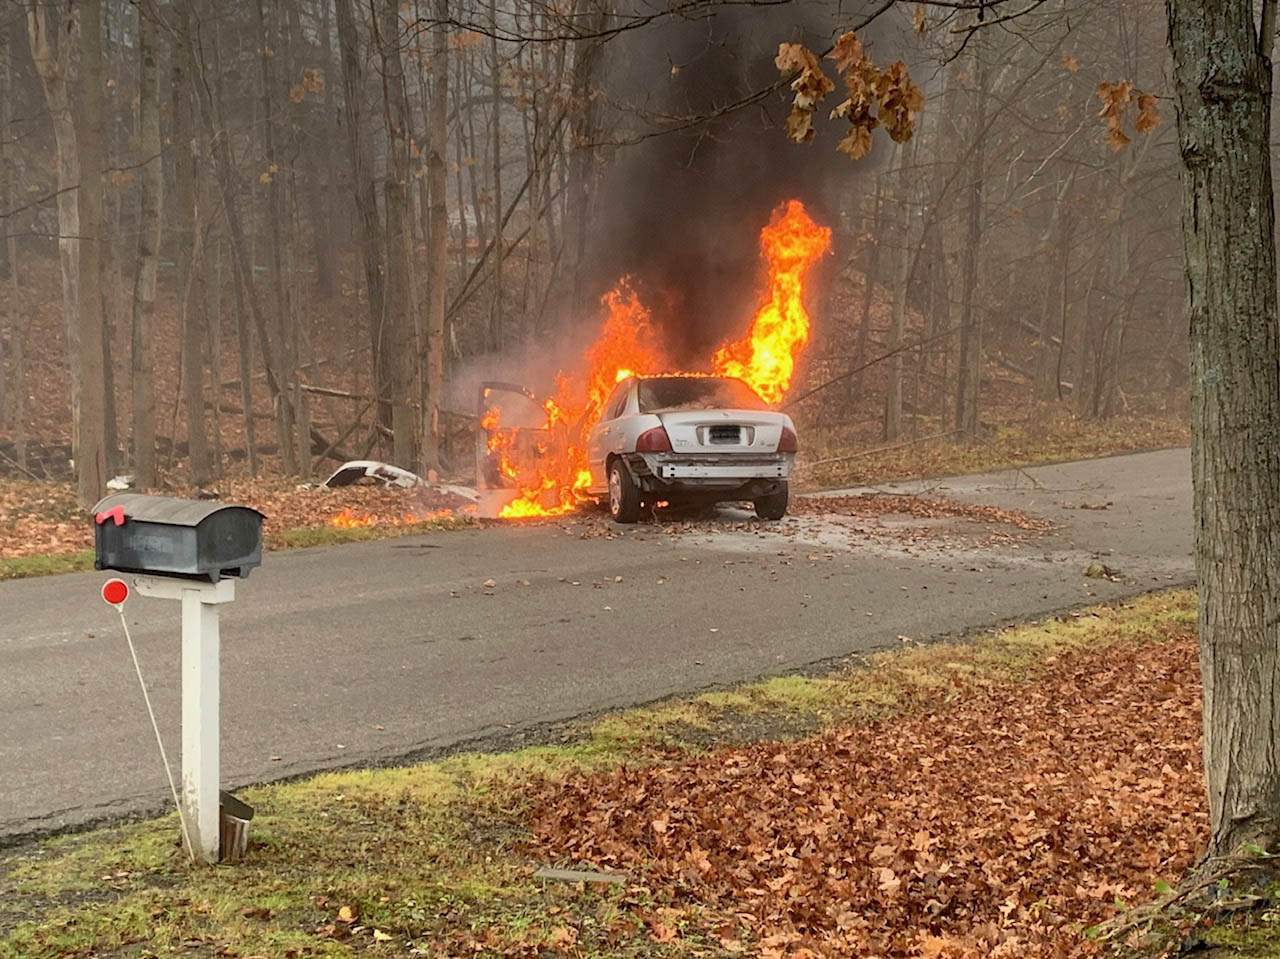 Assist to Maine Fire, Motor vehicle  accident/Car Fire, Pollard Hill Rd - 11/03/22